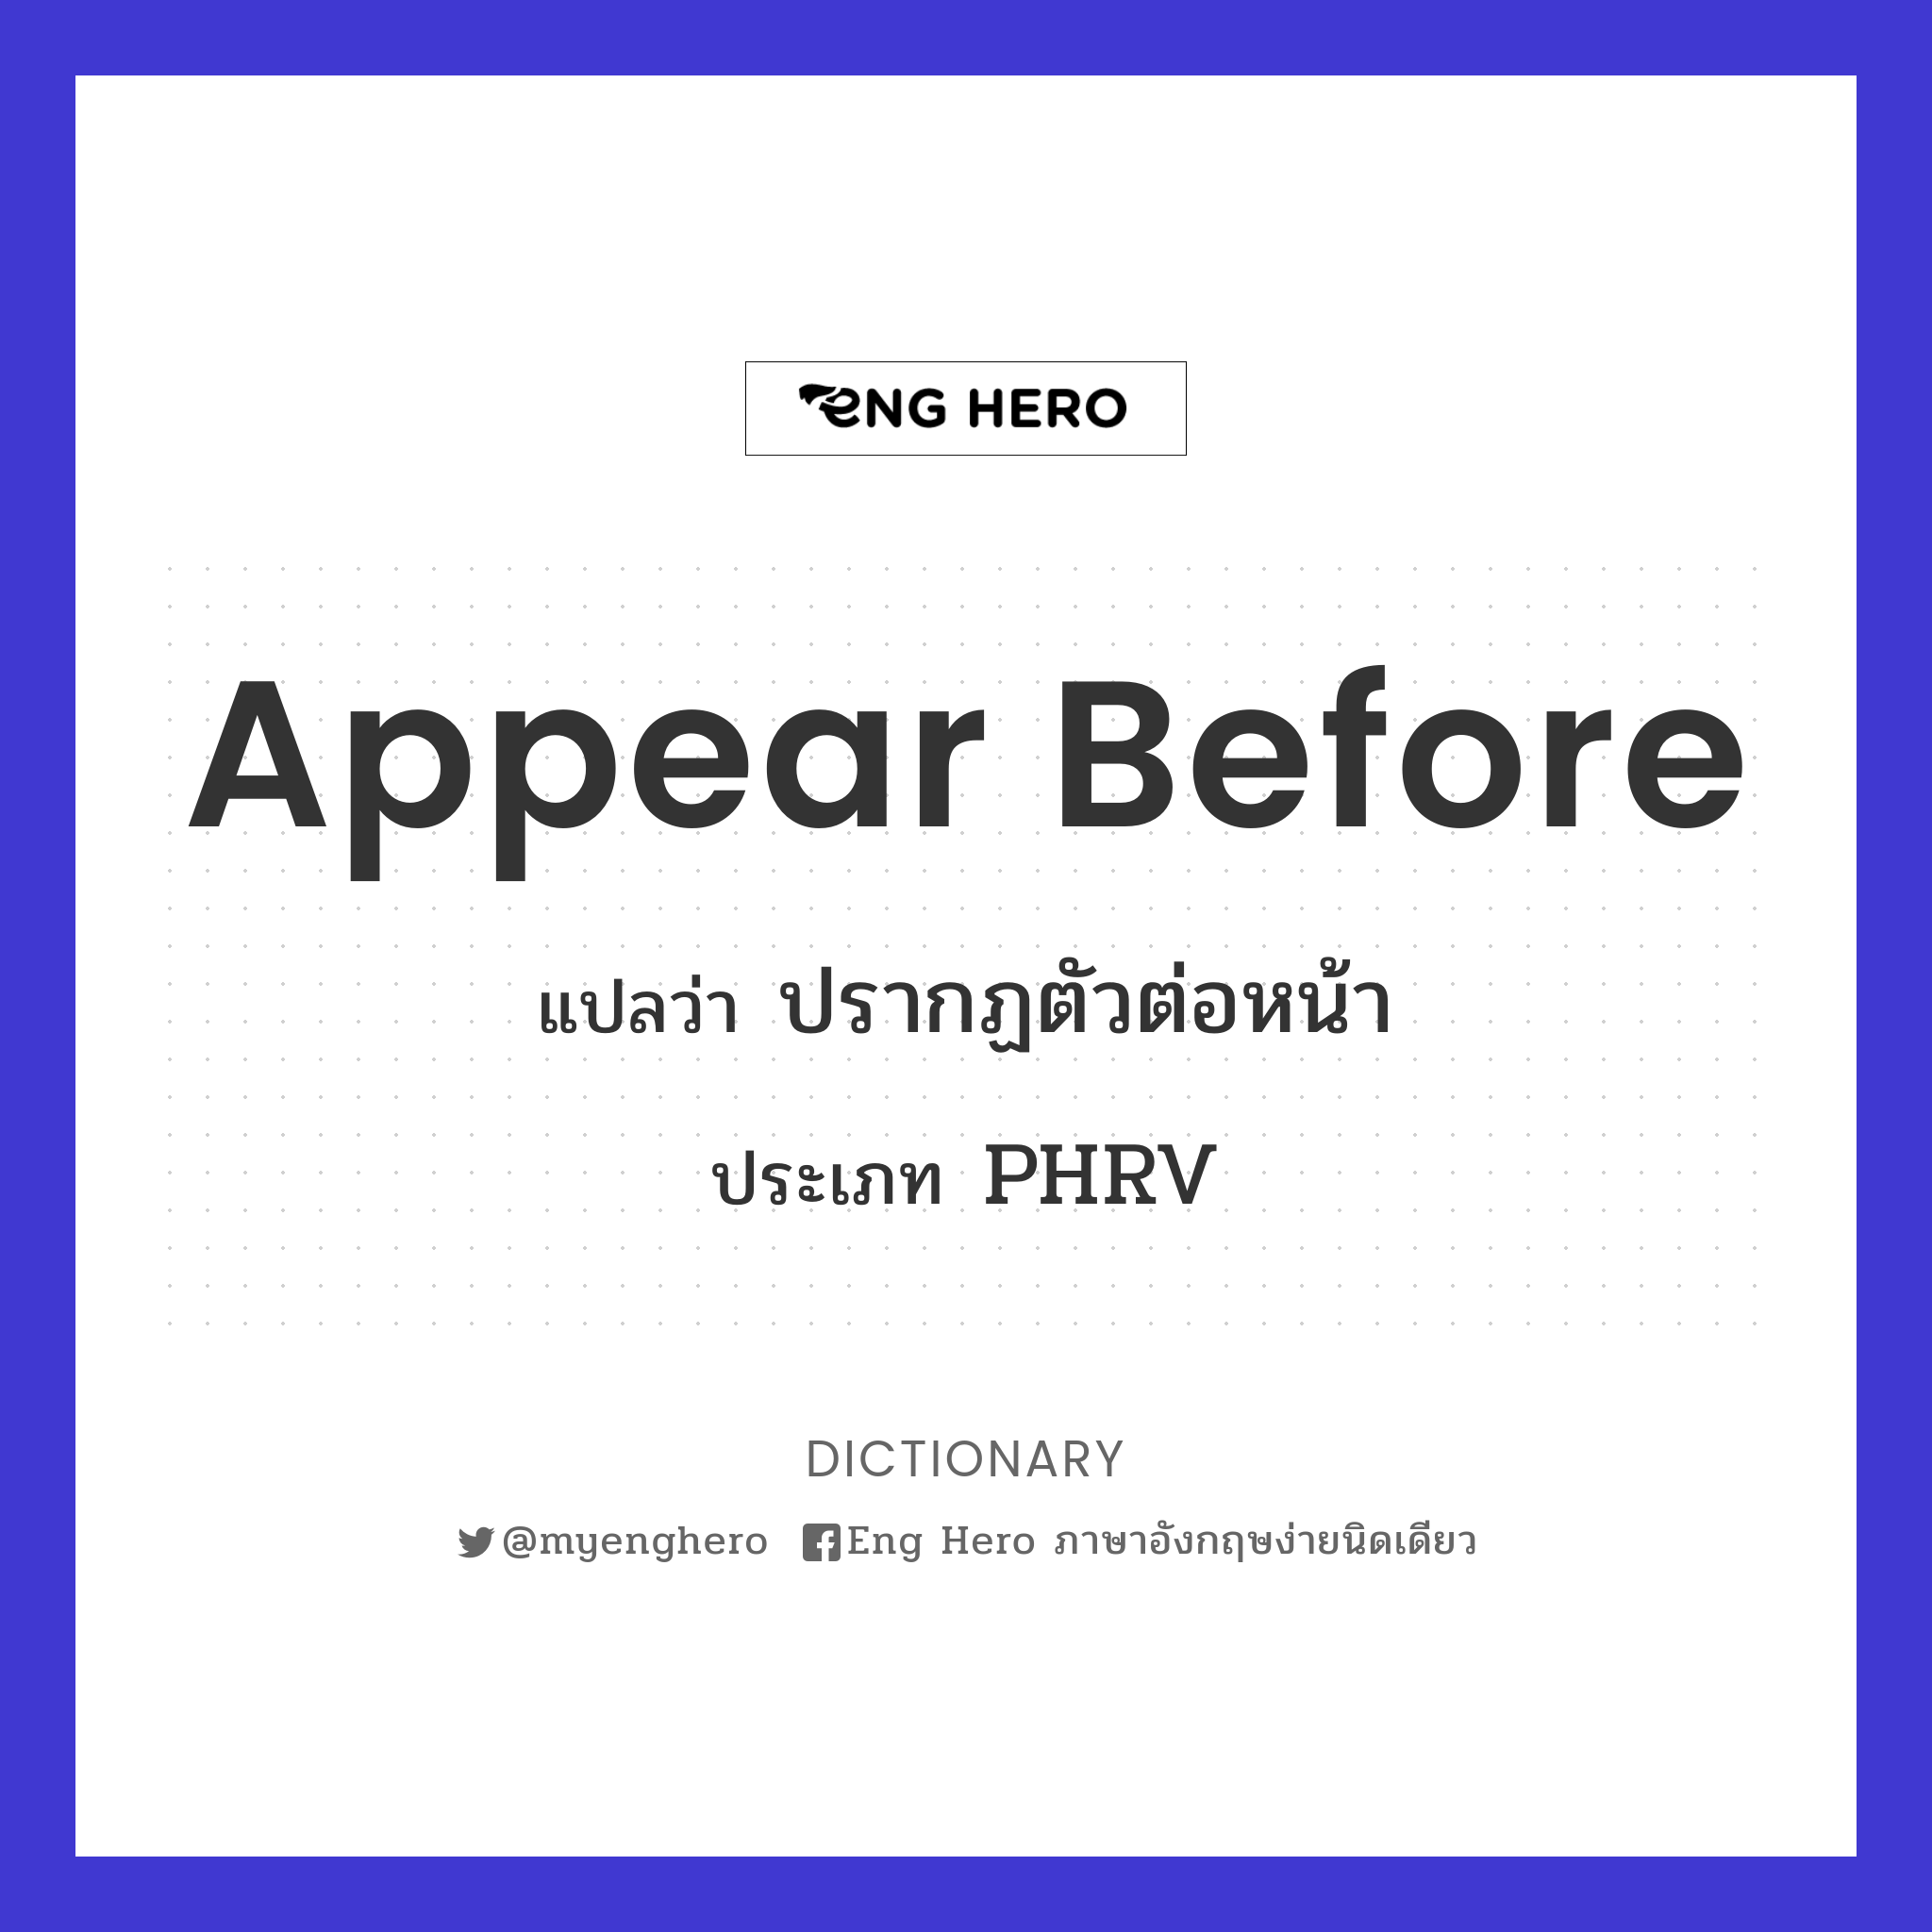 appear before